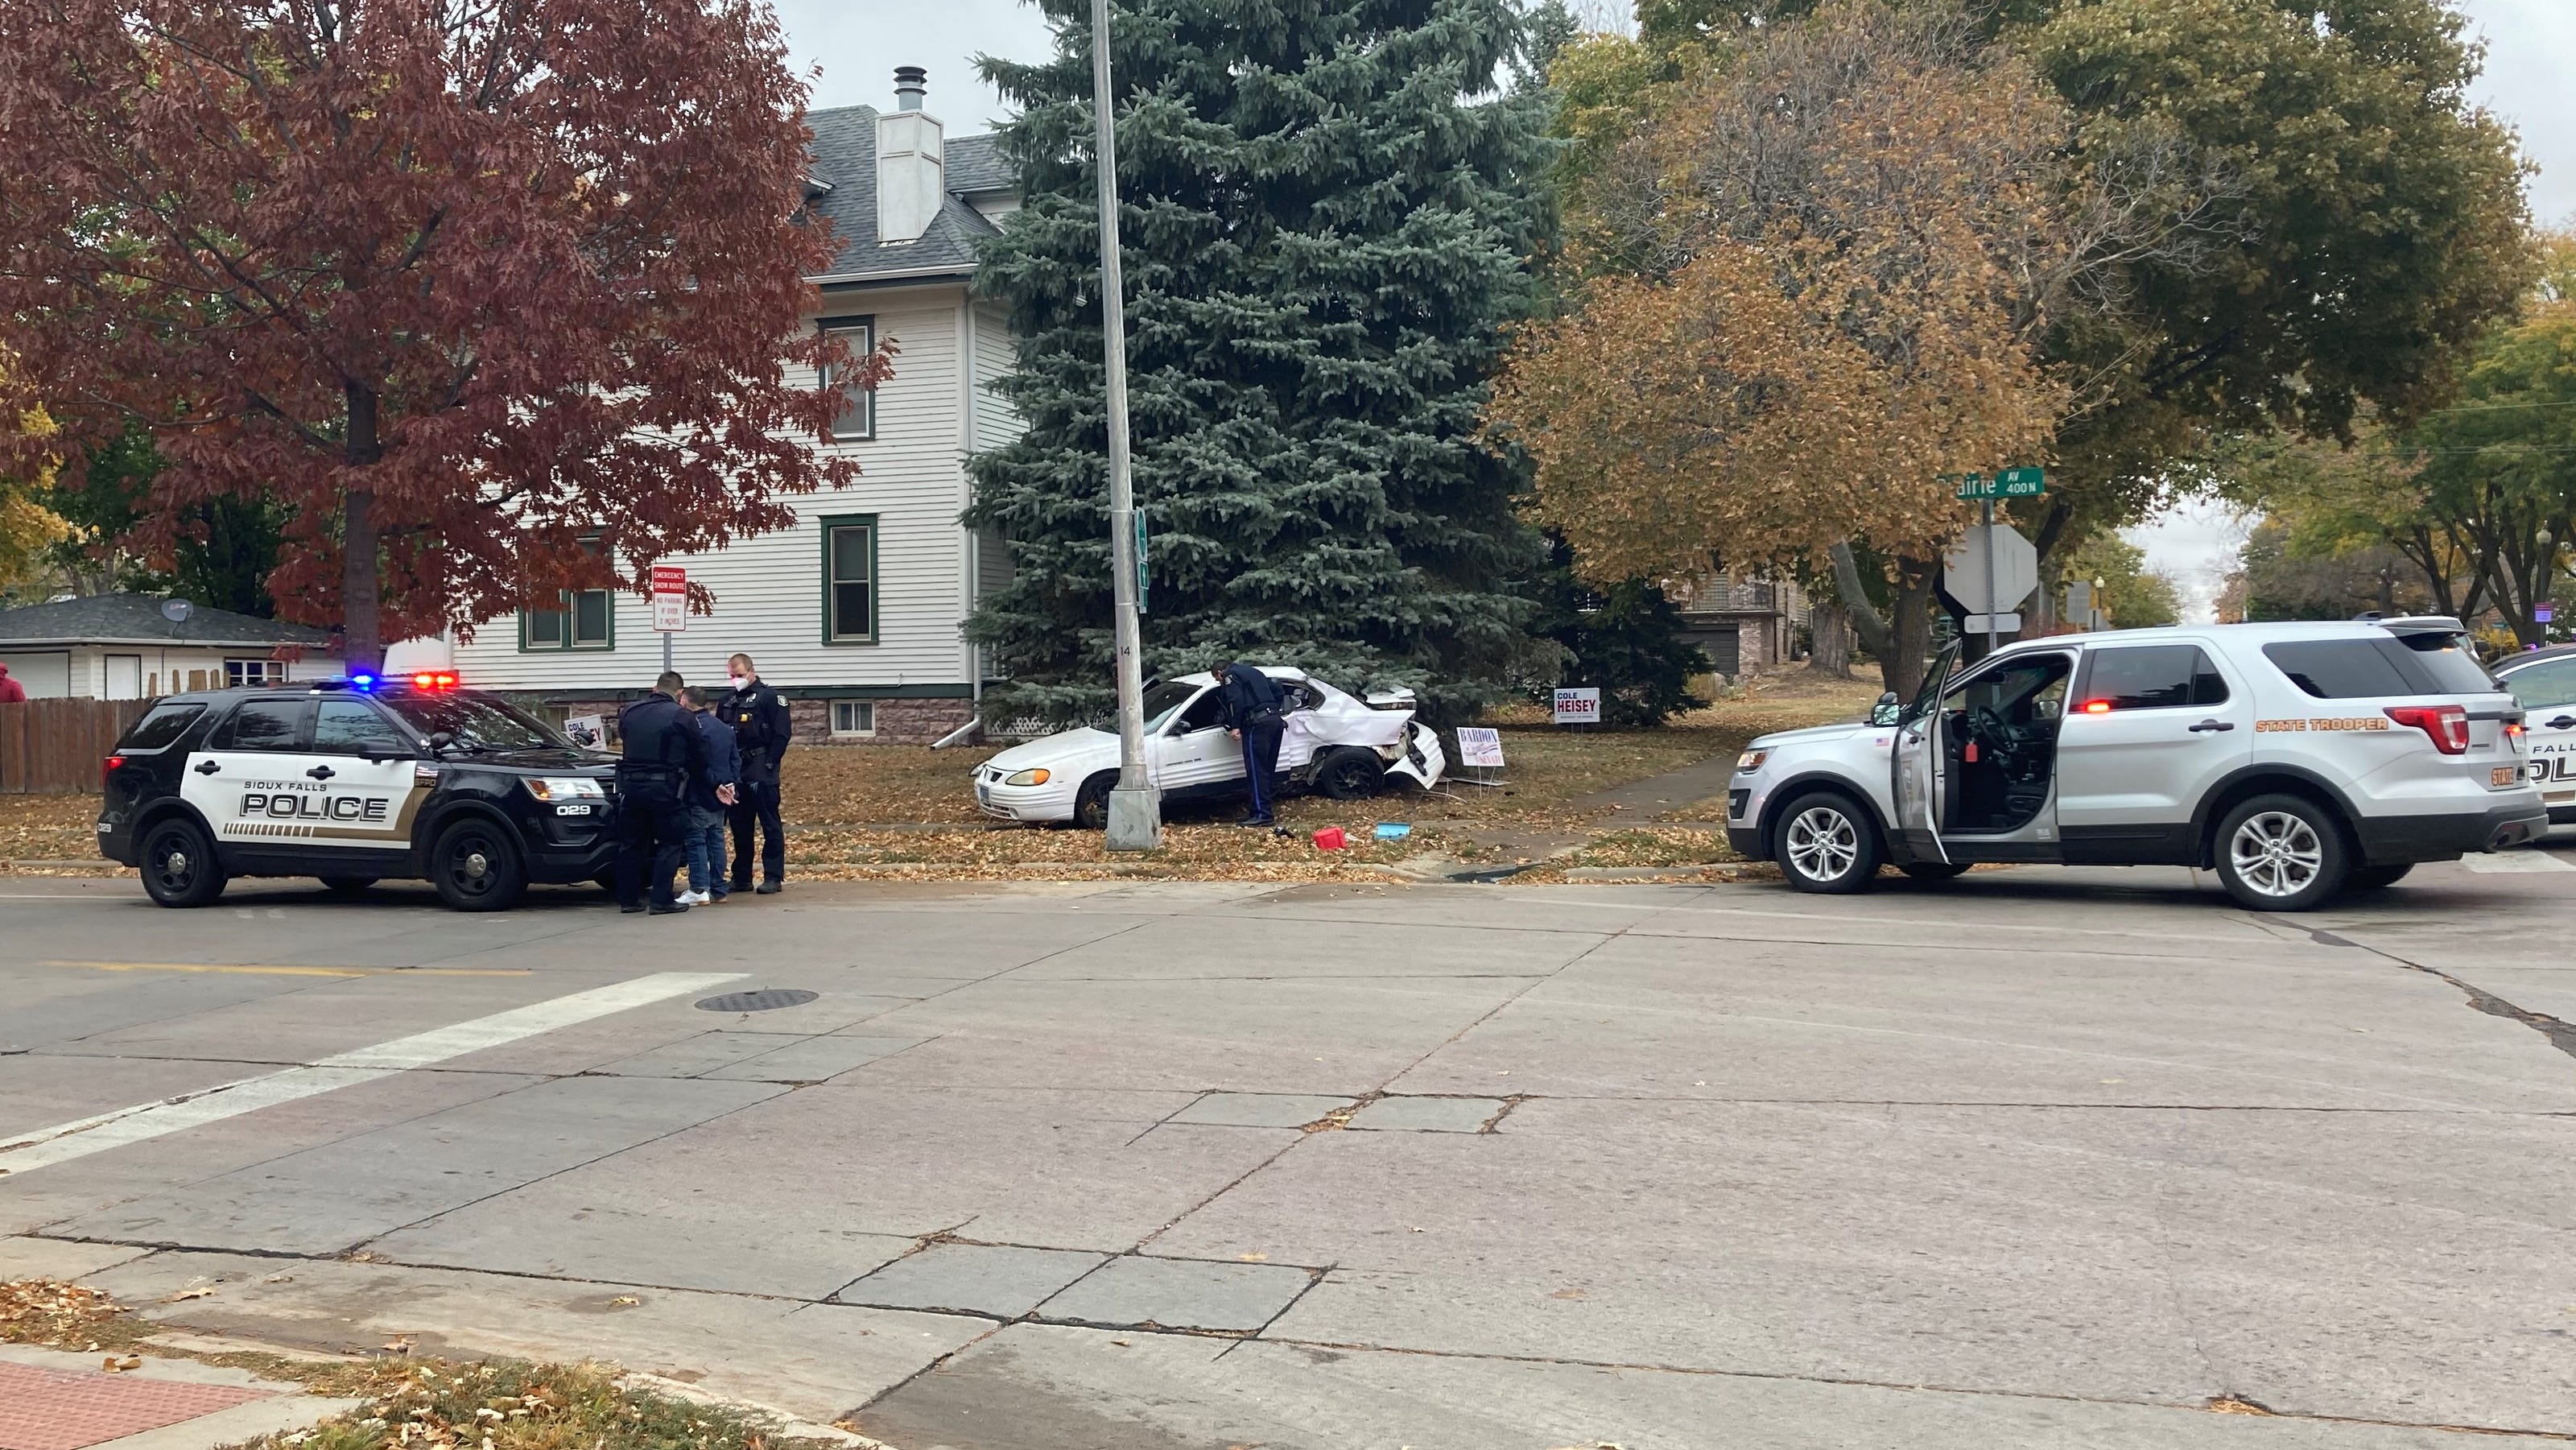 Brief pursuit ends with car crashing into pole in Sioux Falls